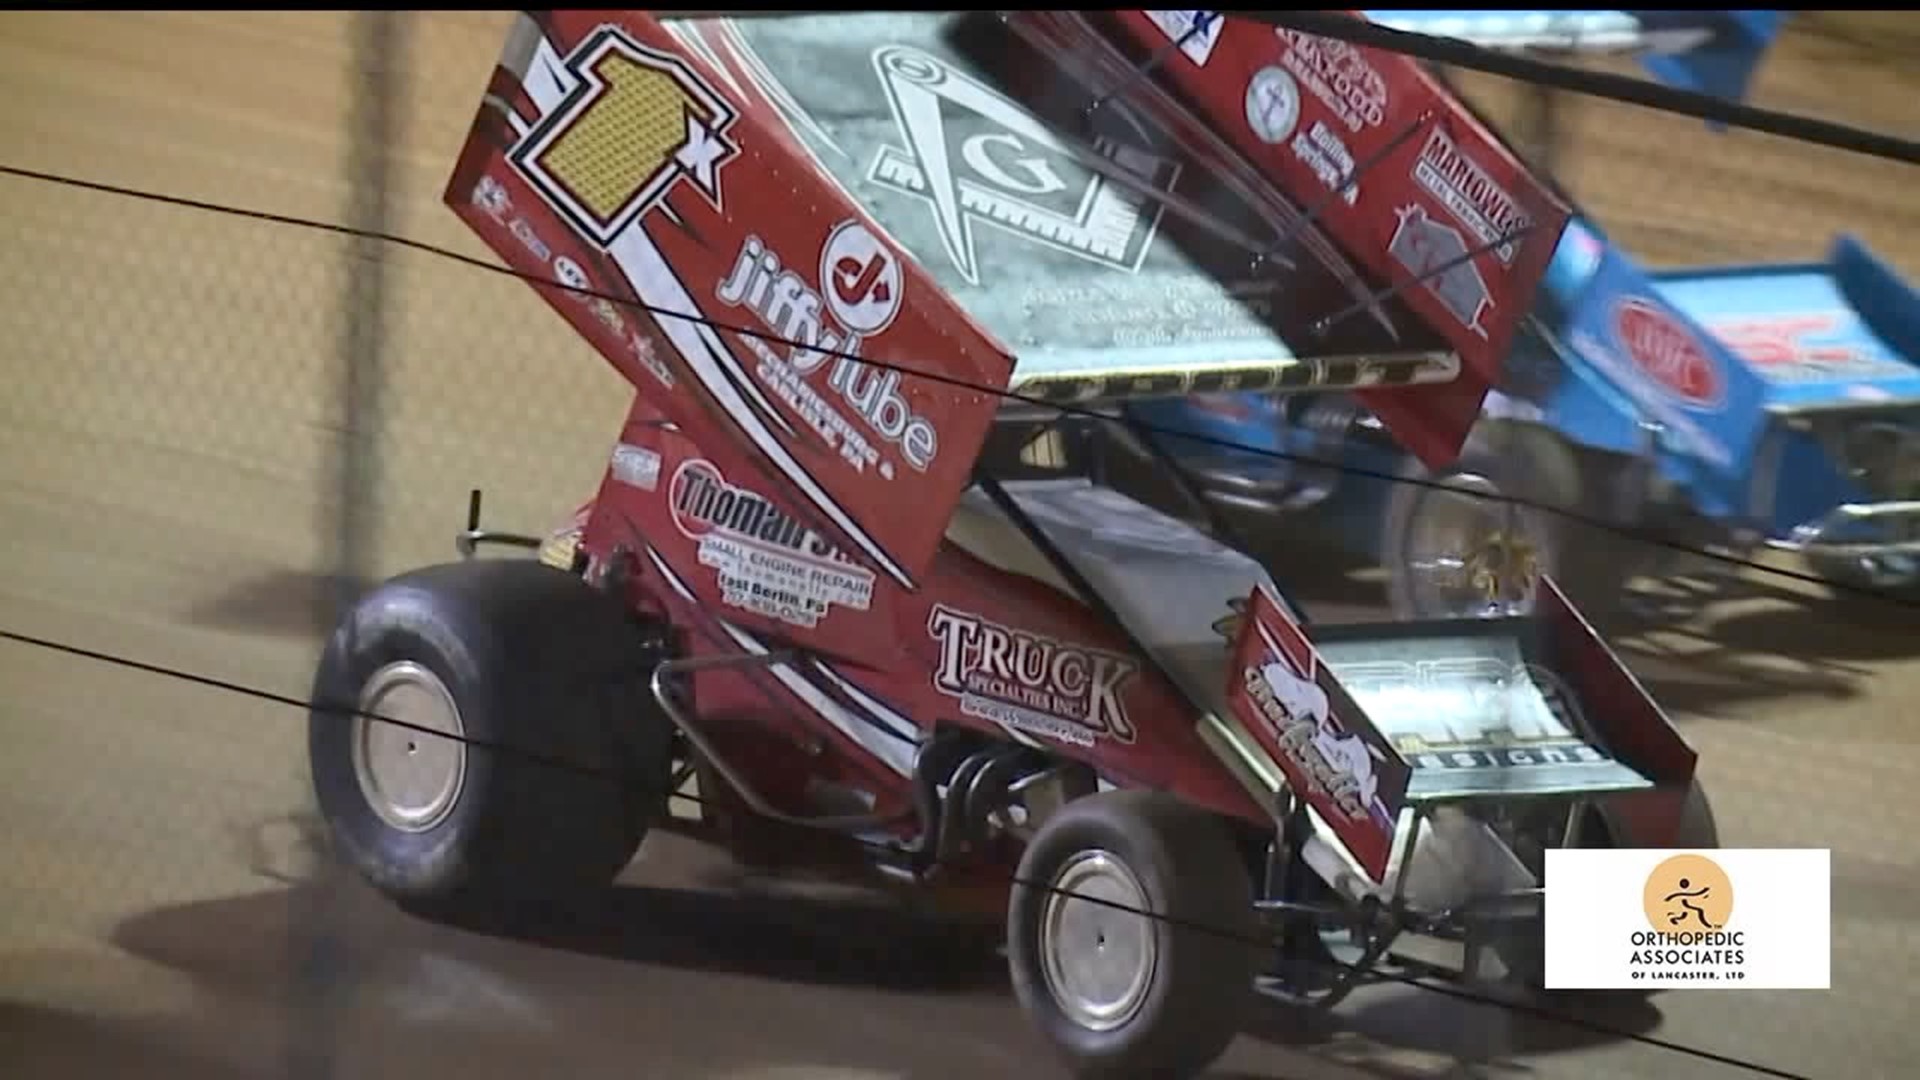 Lyndsay Barna has a jam packed Fast Lane as the action on the dirt track heats up.